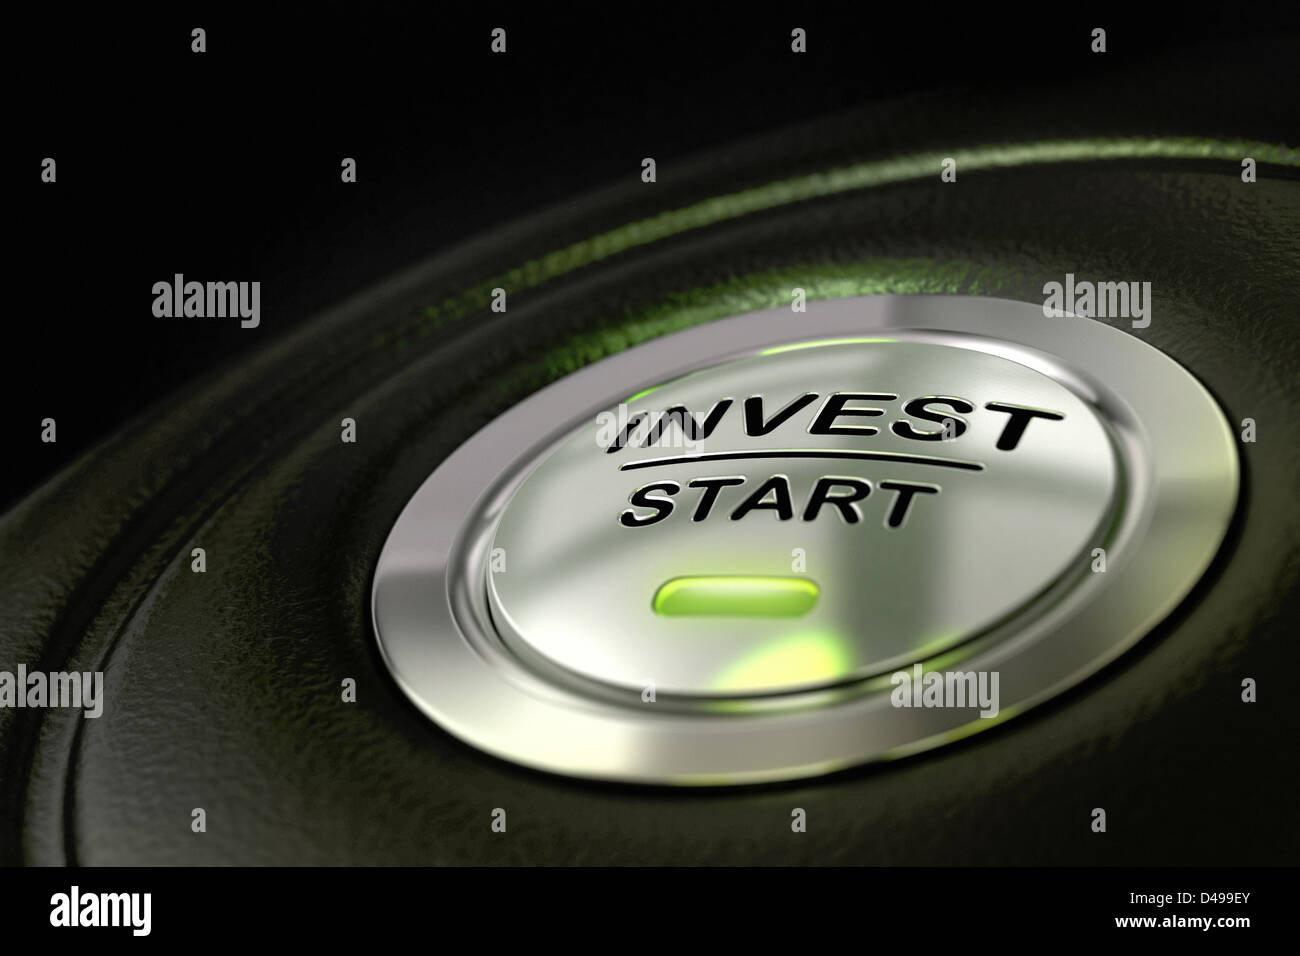 abstract invest start button, metal material, green color and black textured background. Focus on the main word and blur effect. Stock Photo